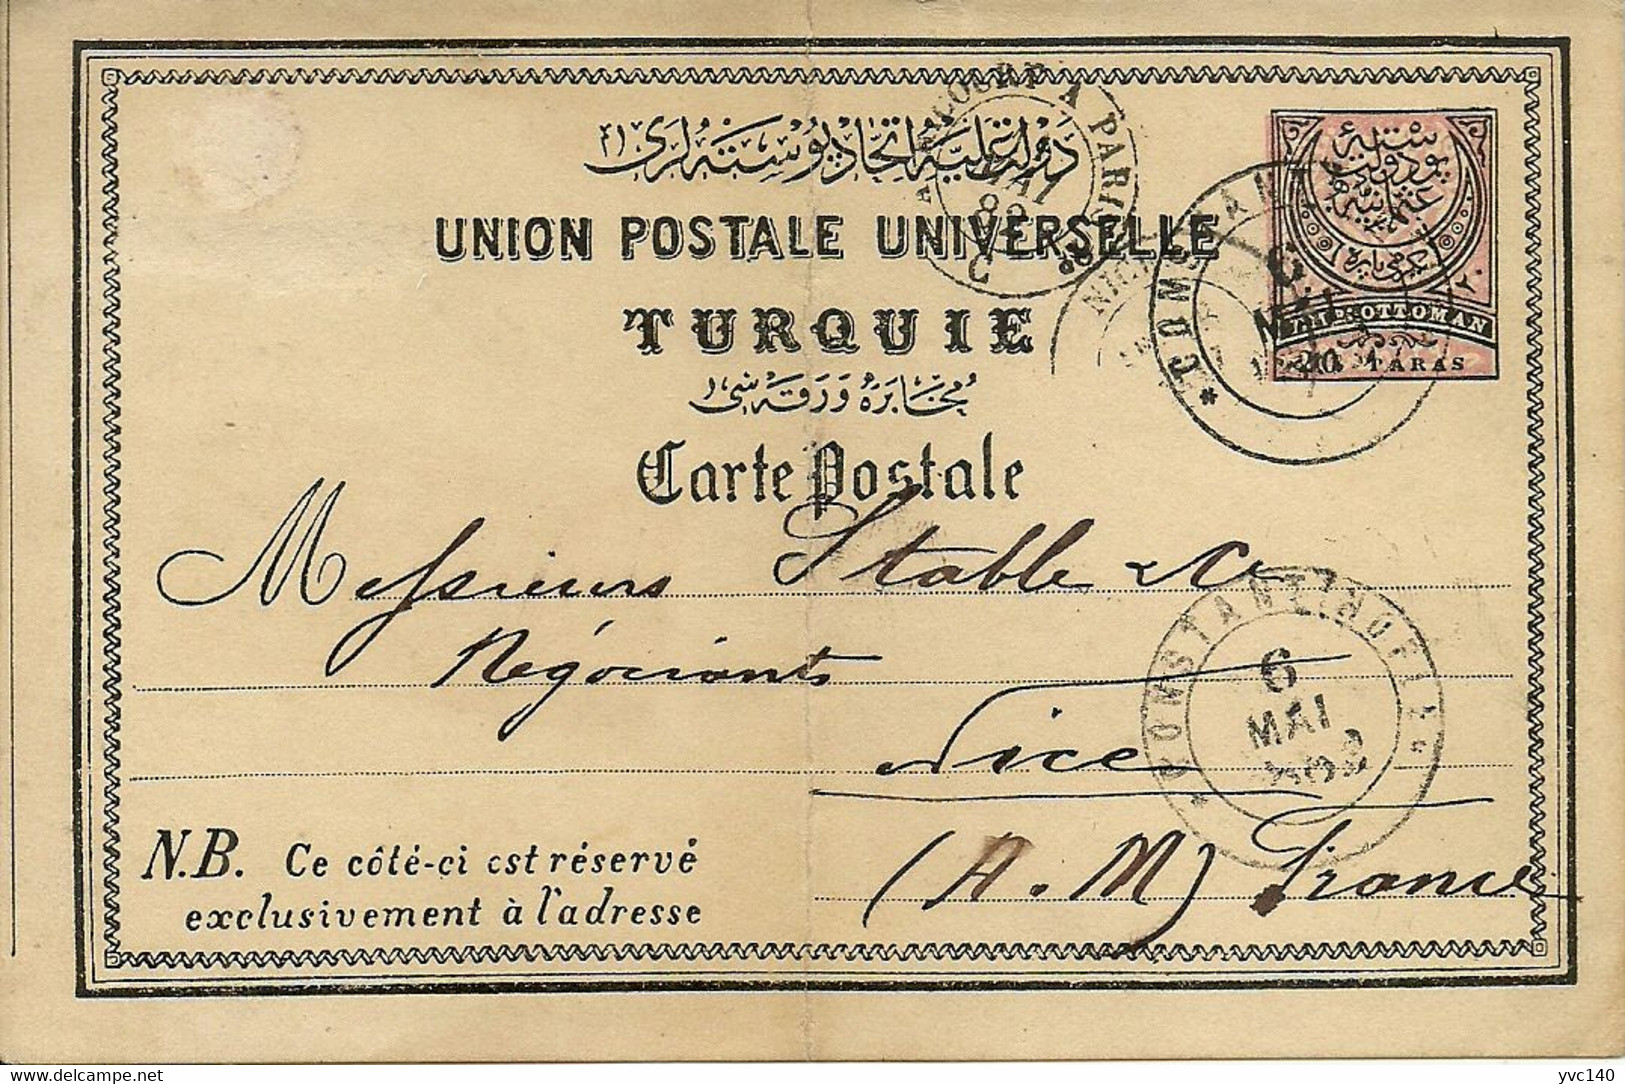 Turkey; 1882 Ottoman Postal Stationery Sent To France - Covers & Documents